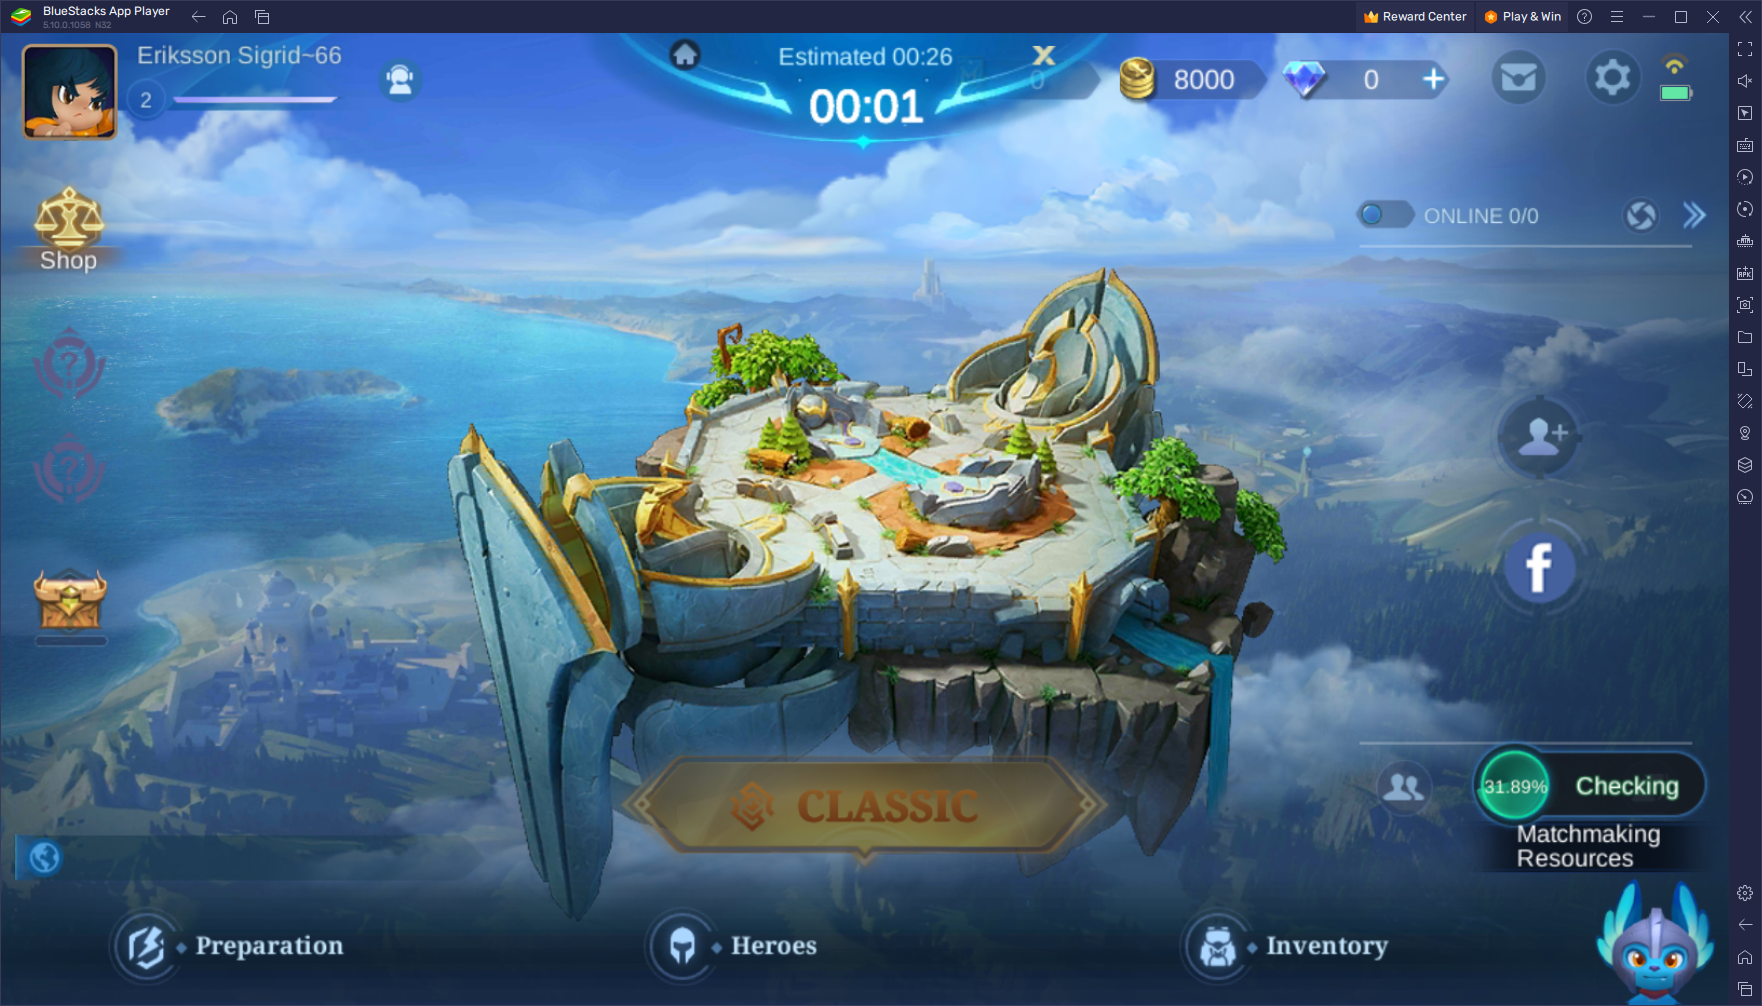 Play Mobile Legends: Bang Bang on PC at 120 FPS with Android 11. Available Only on BlueStacks